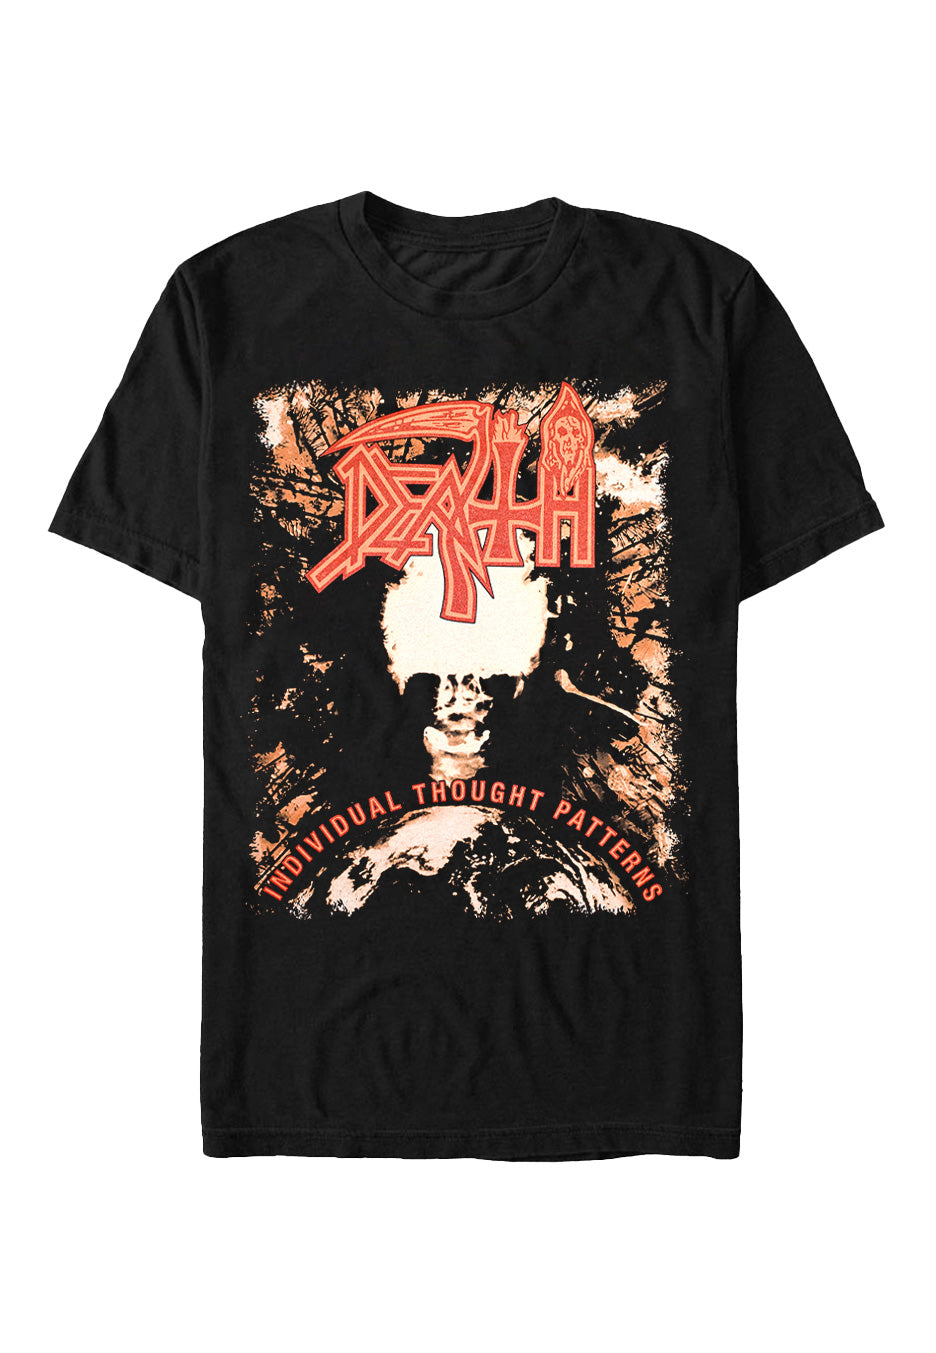 Death - Individual Thought Patterns - T-Shirt